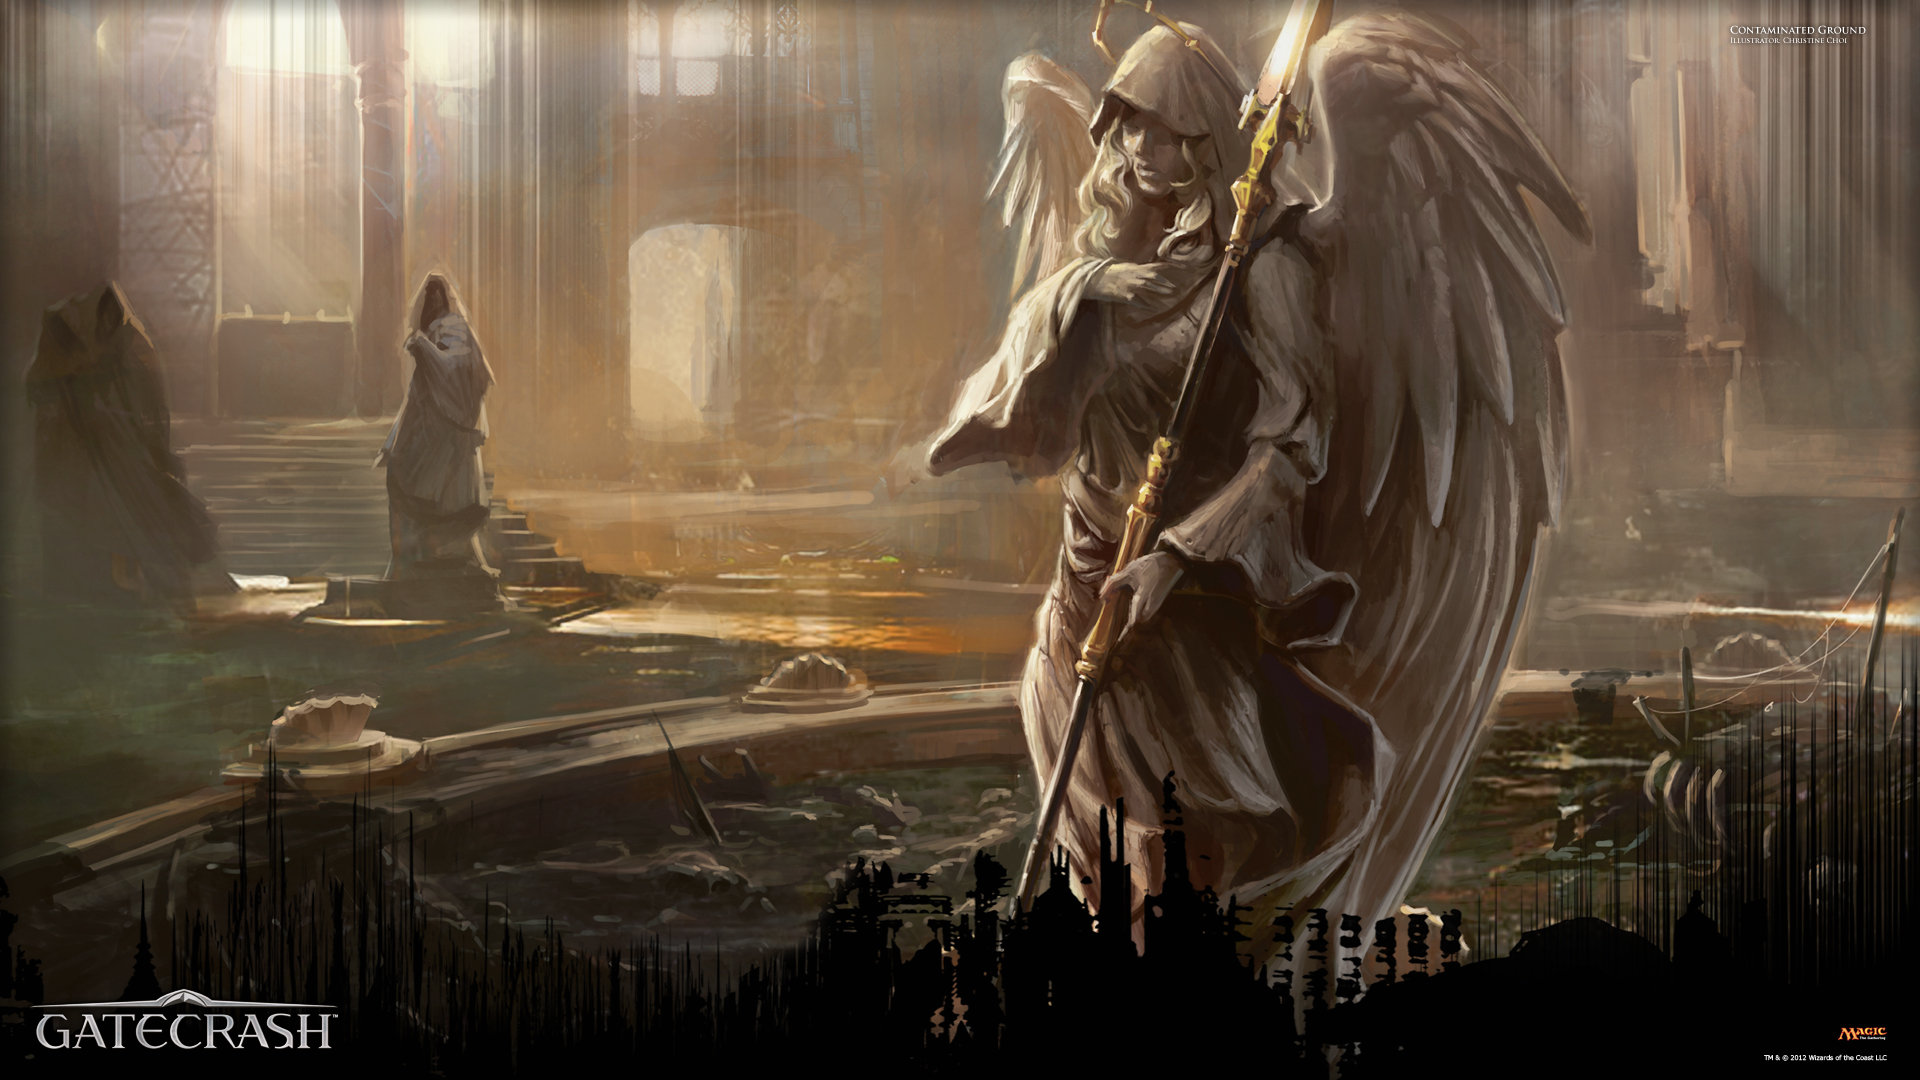 Wallpaper Of The Week Contaminated Ground Magic The Gathering